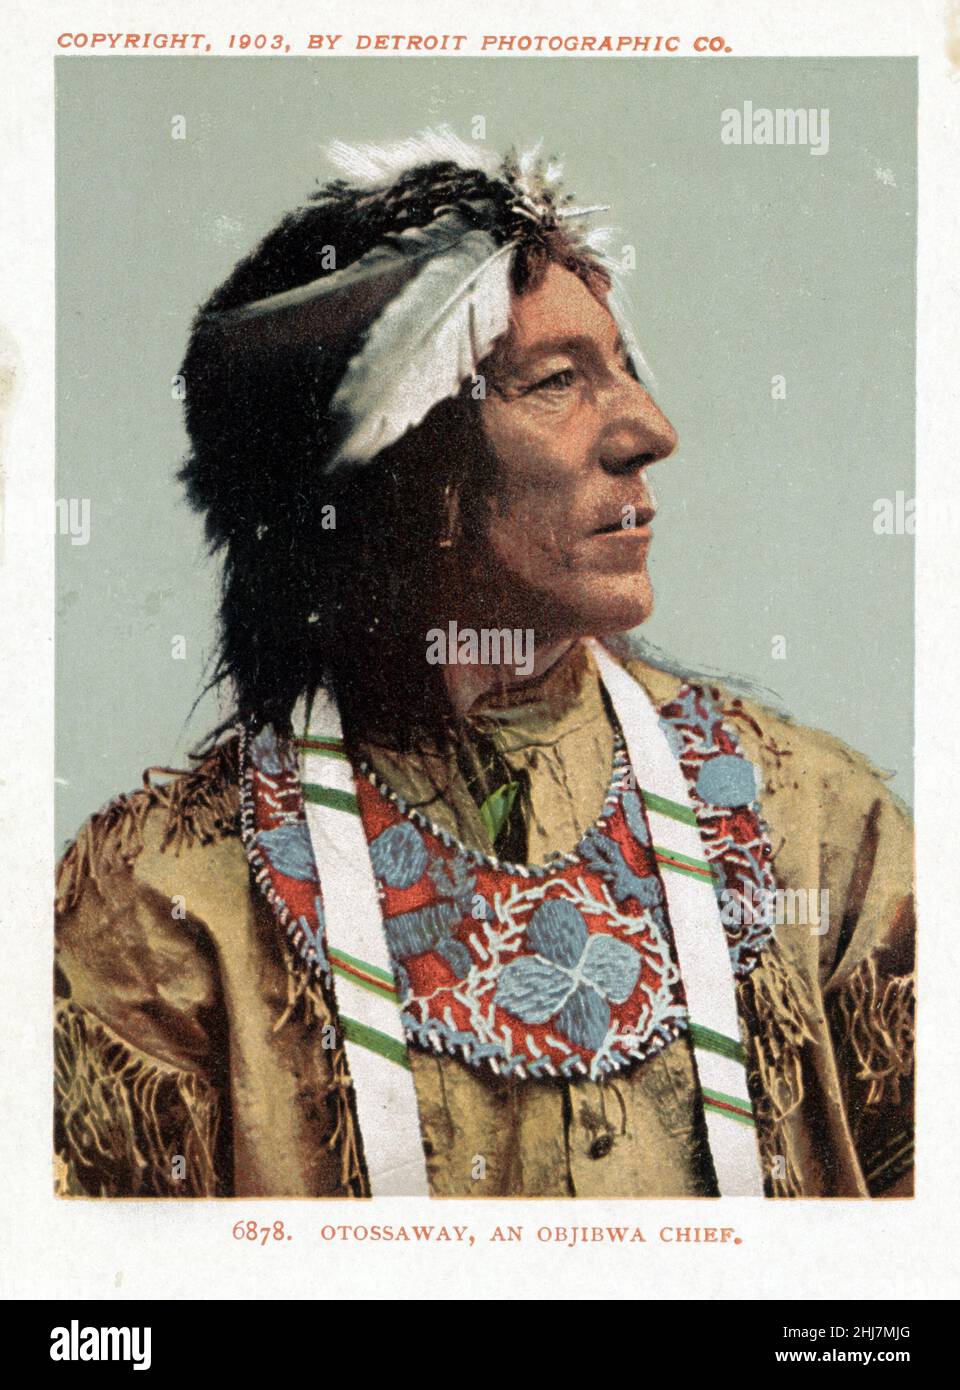 Otossaway, an Ojibwa chief - Antique and vintage photo - Native american / Indian / American Indian. Detroit Photographic Co. , 1903. Stock Photo